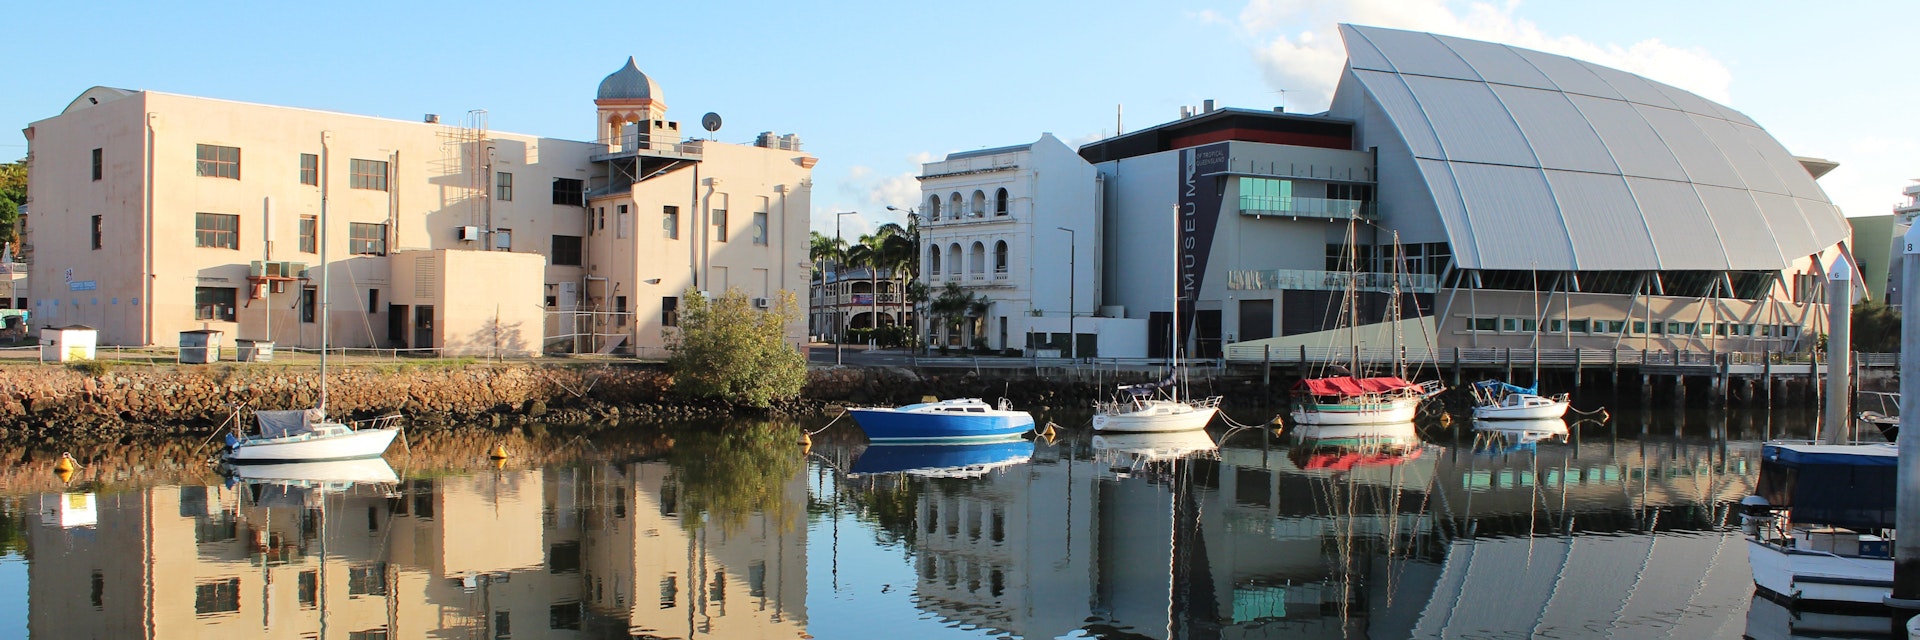 Bullwinkles Nightclub and Museum of Tropical Queensland (pictured at right) with reflection in water, Townsville. Australia
